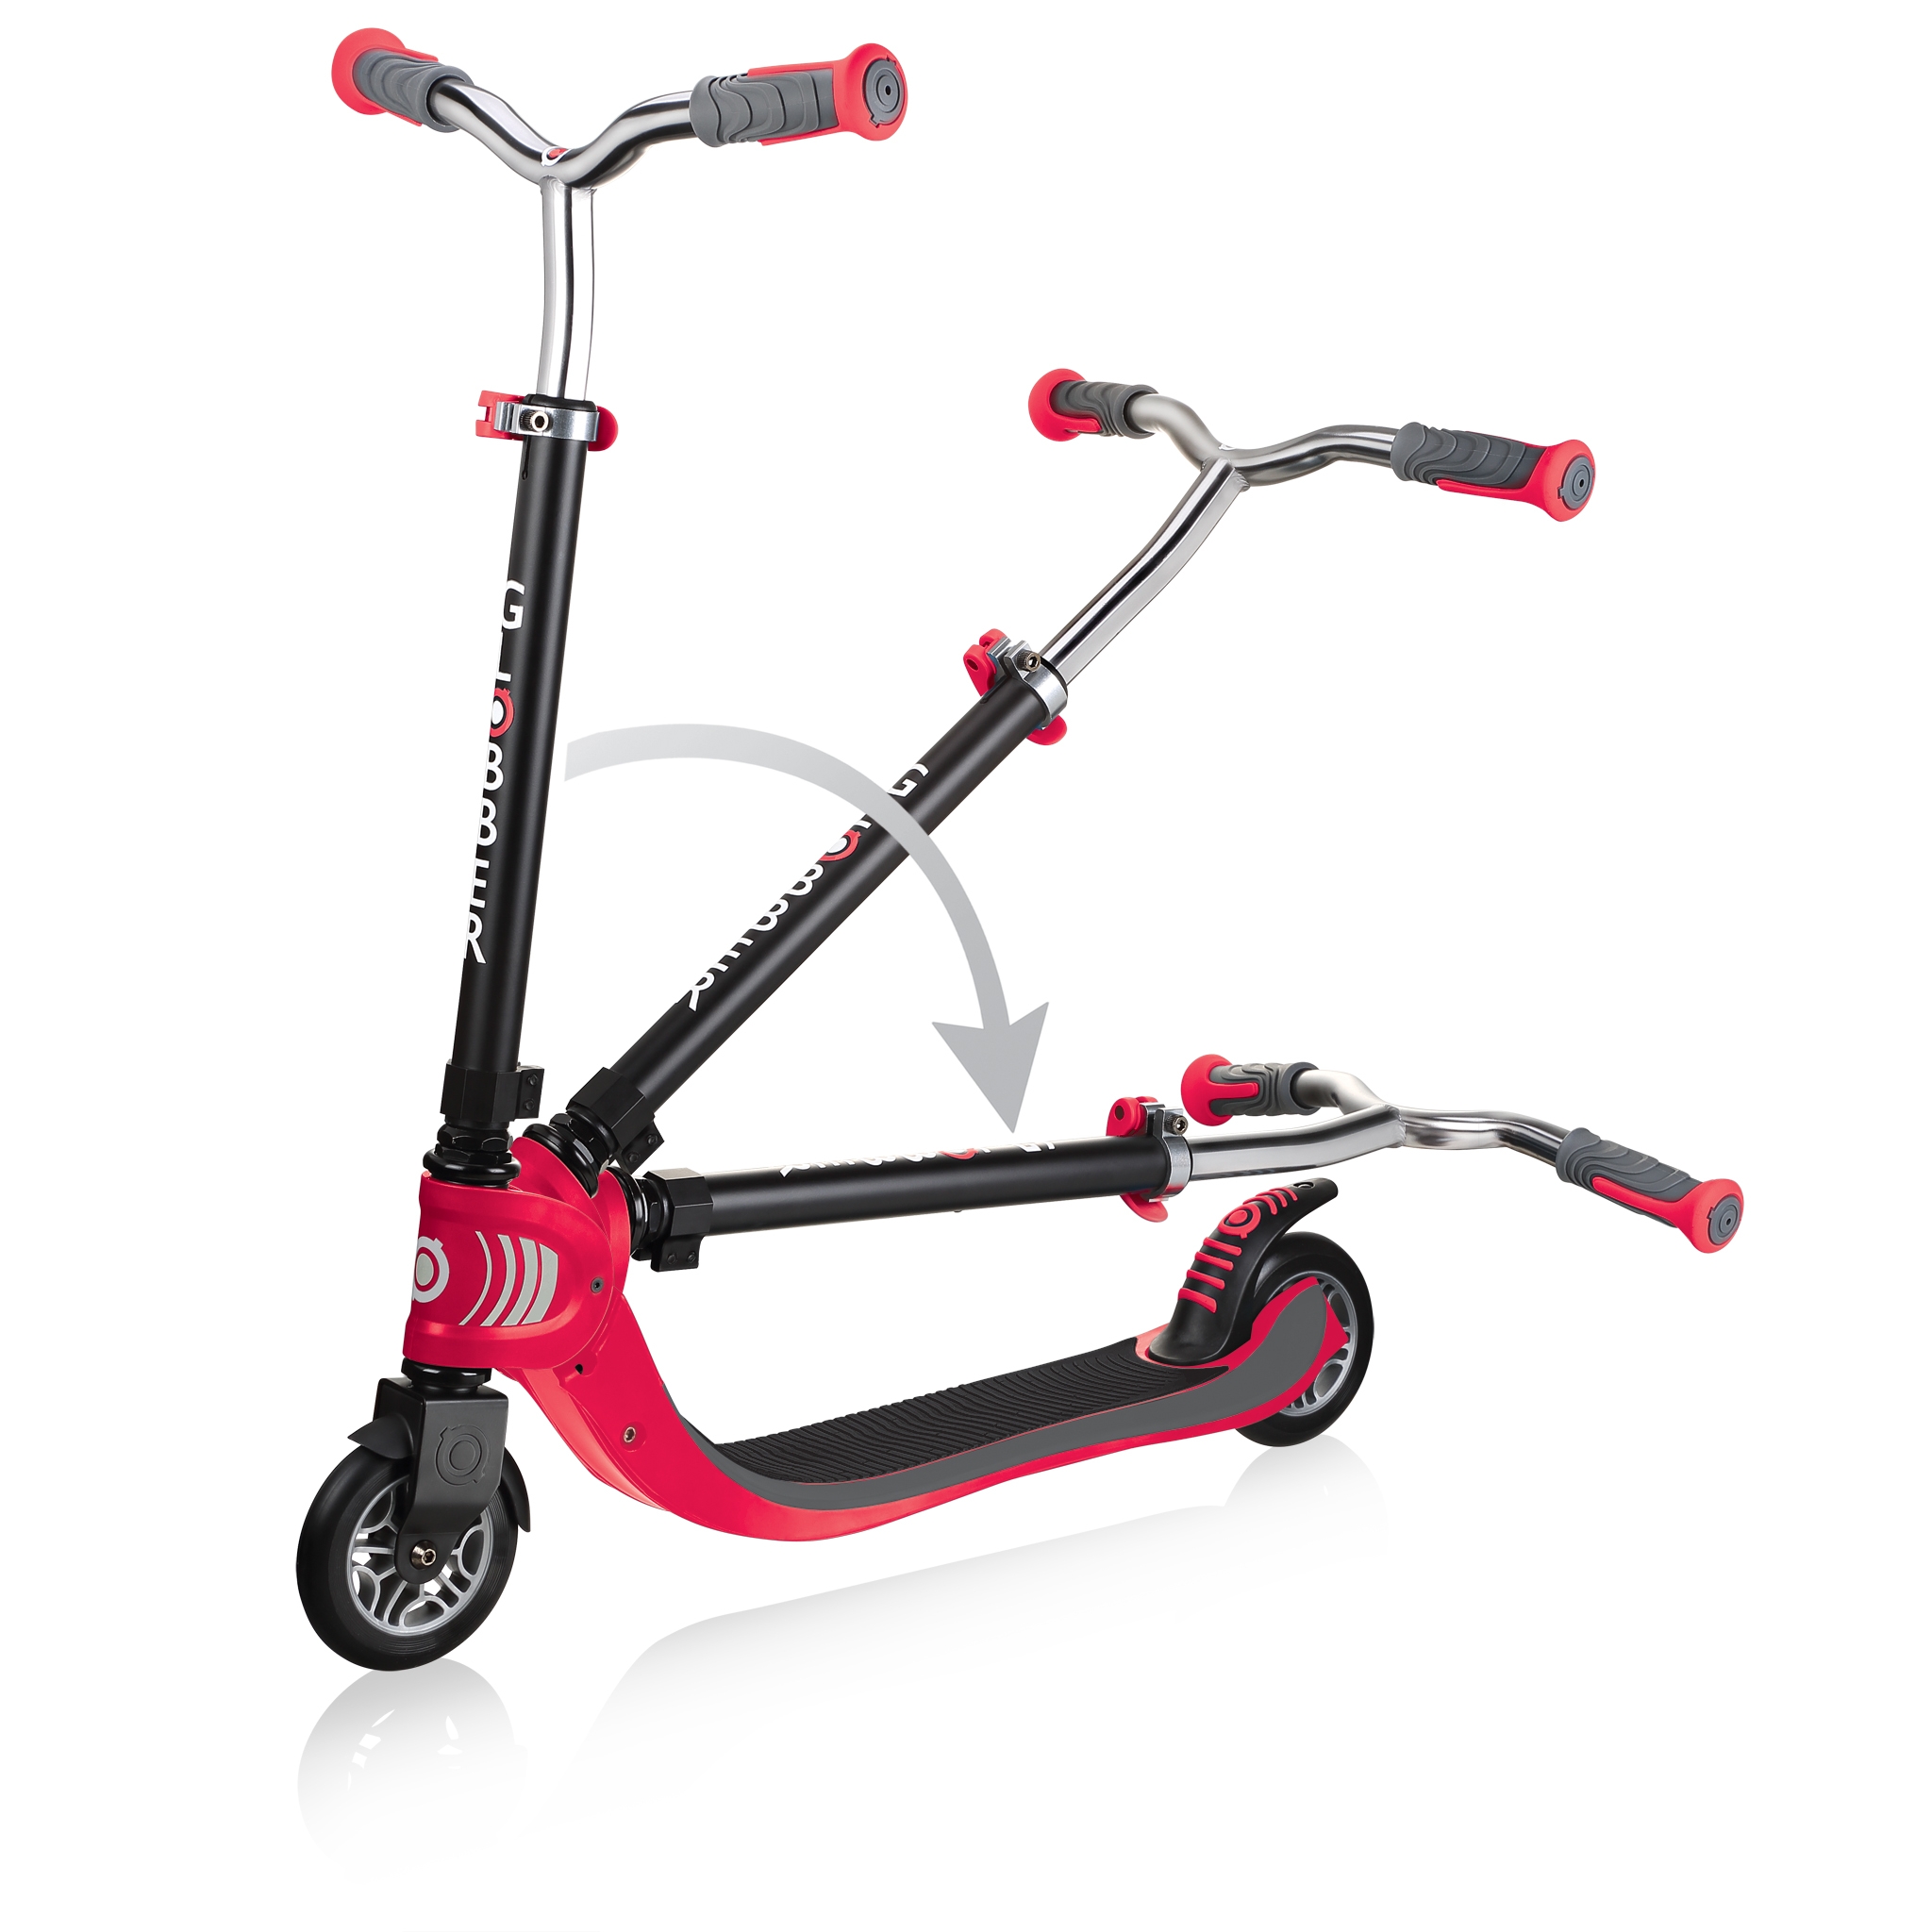 FLOW-FOLDABLE-125-2-wheel-folding-scooter-for-kids-new-red 3